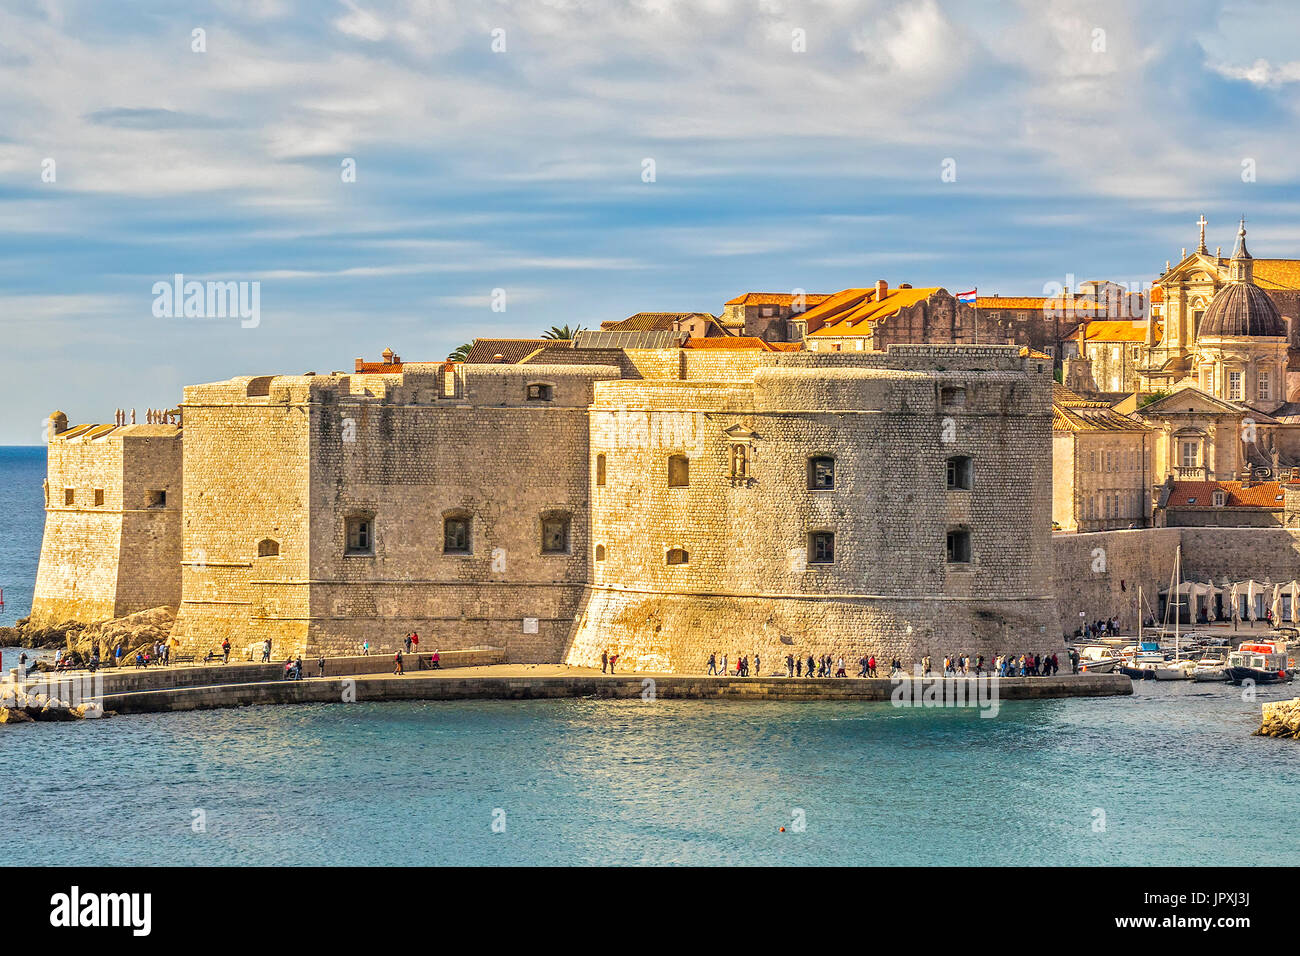 The Harbour Fortifications Dubrovnik Croatia Stock Photo